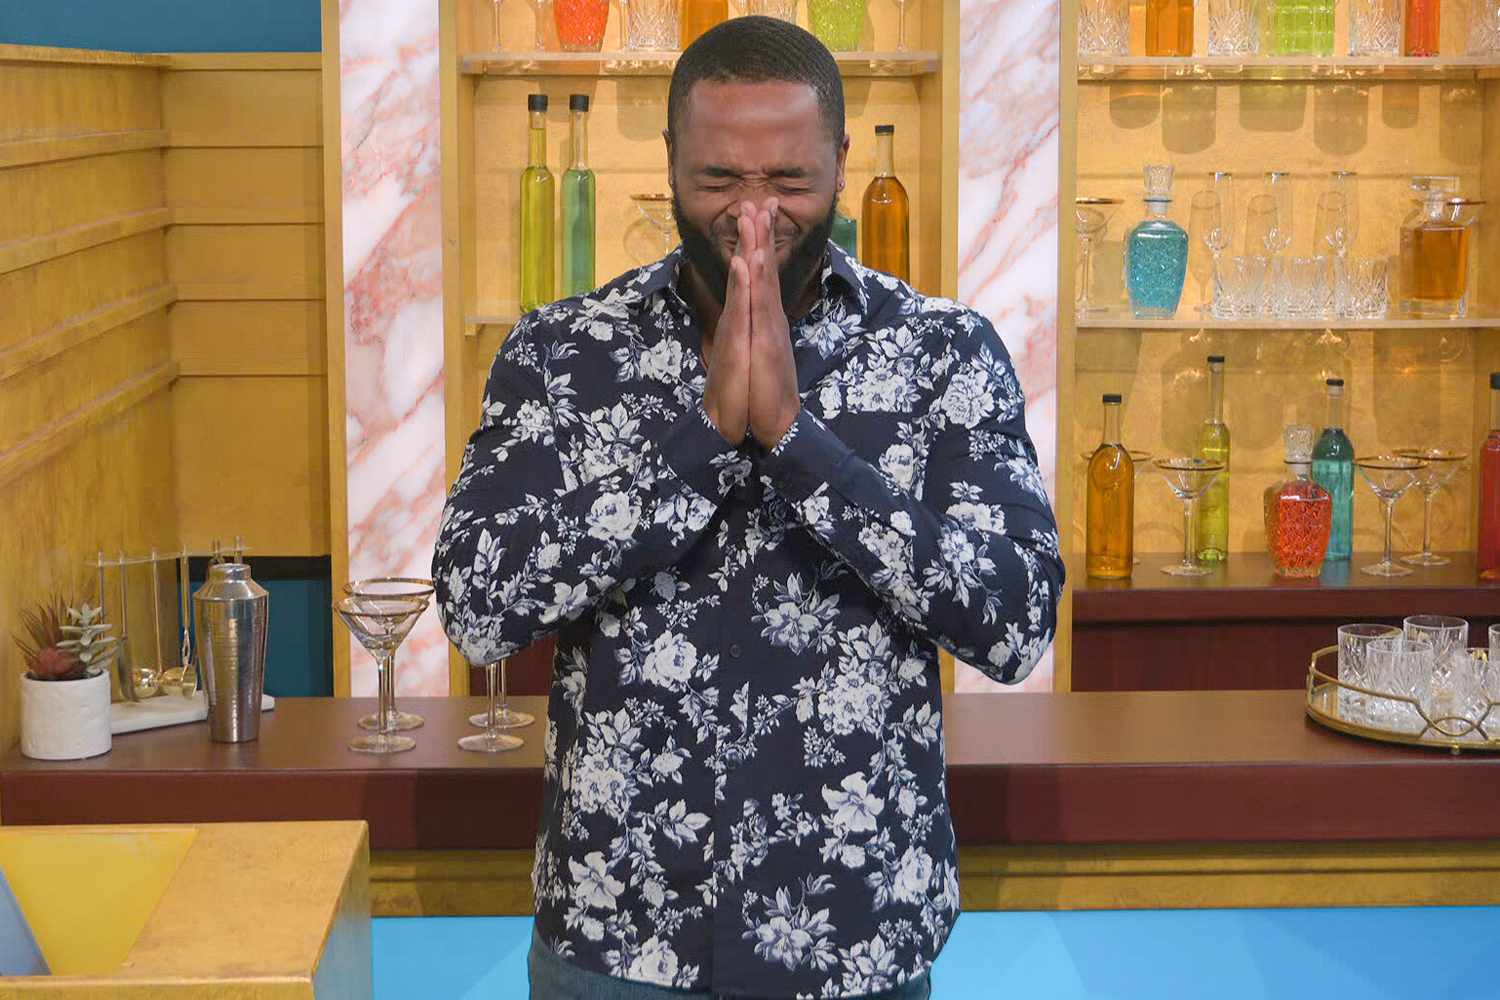 BIG BROTHER Sunday, September 25 (8:00 – 9:00 PM ET/PT on the CBS Television Network and live streaming on Paramount+. Pictured: Monte Taylor